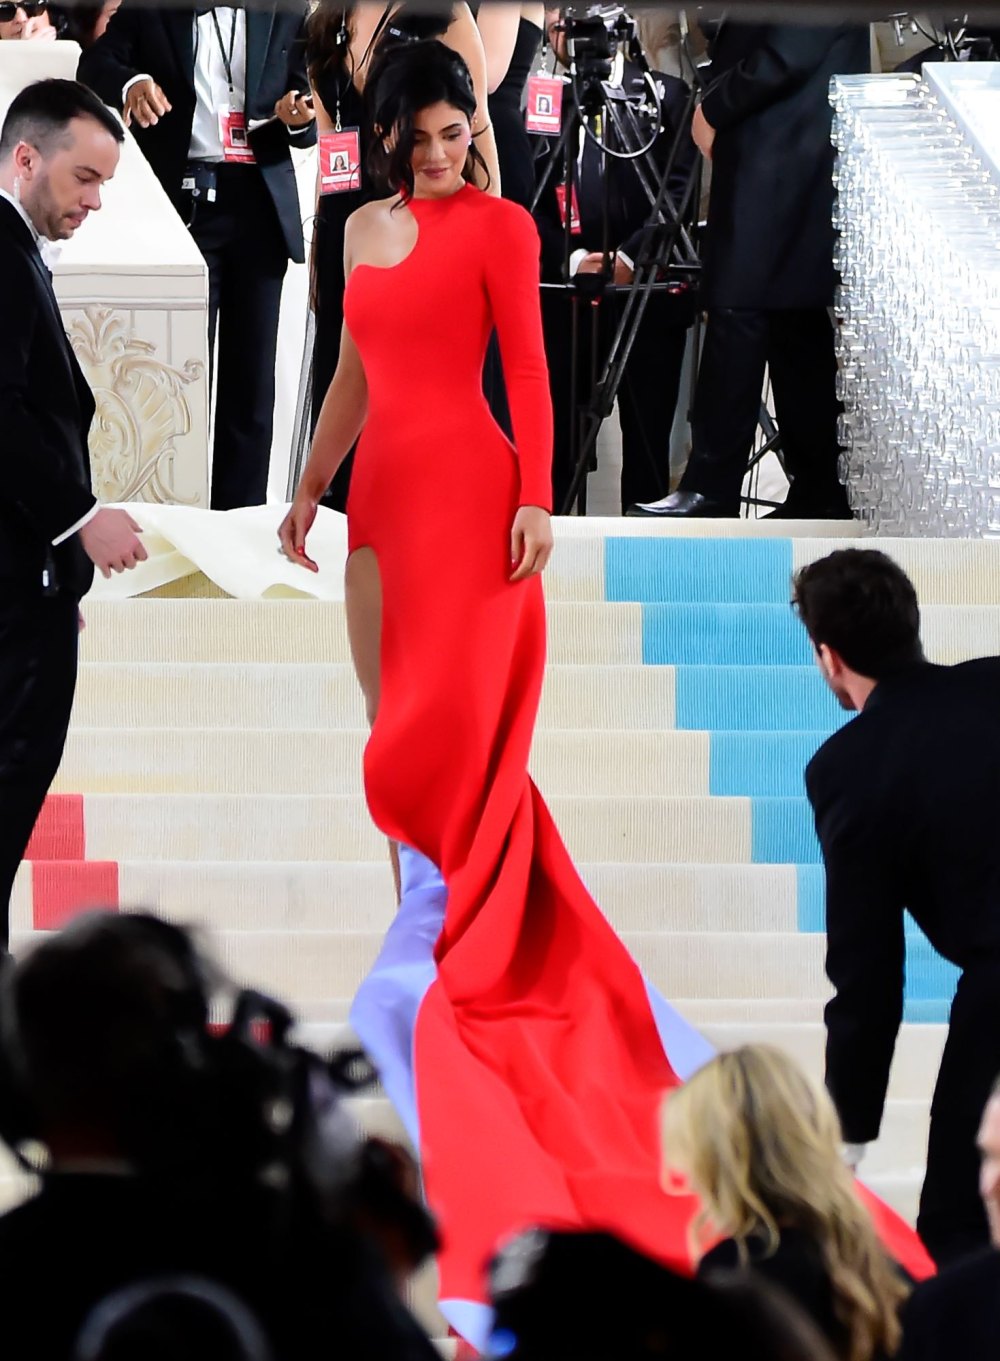 Kylie Jenner's escort fired from Met Gala